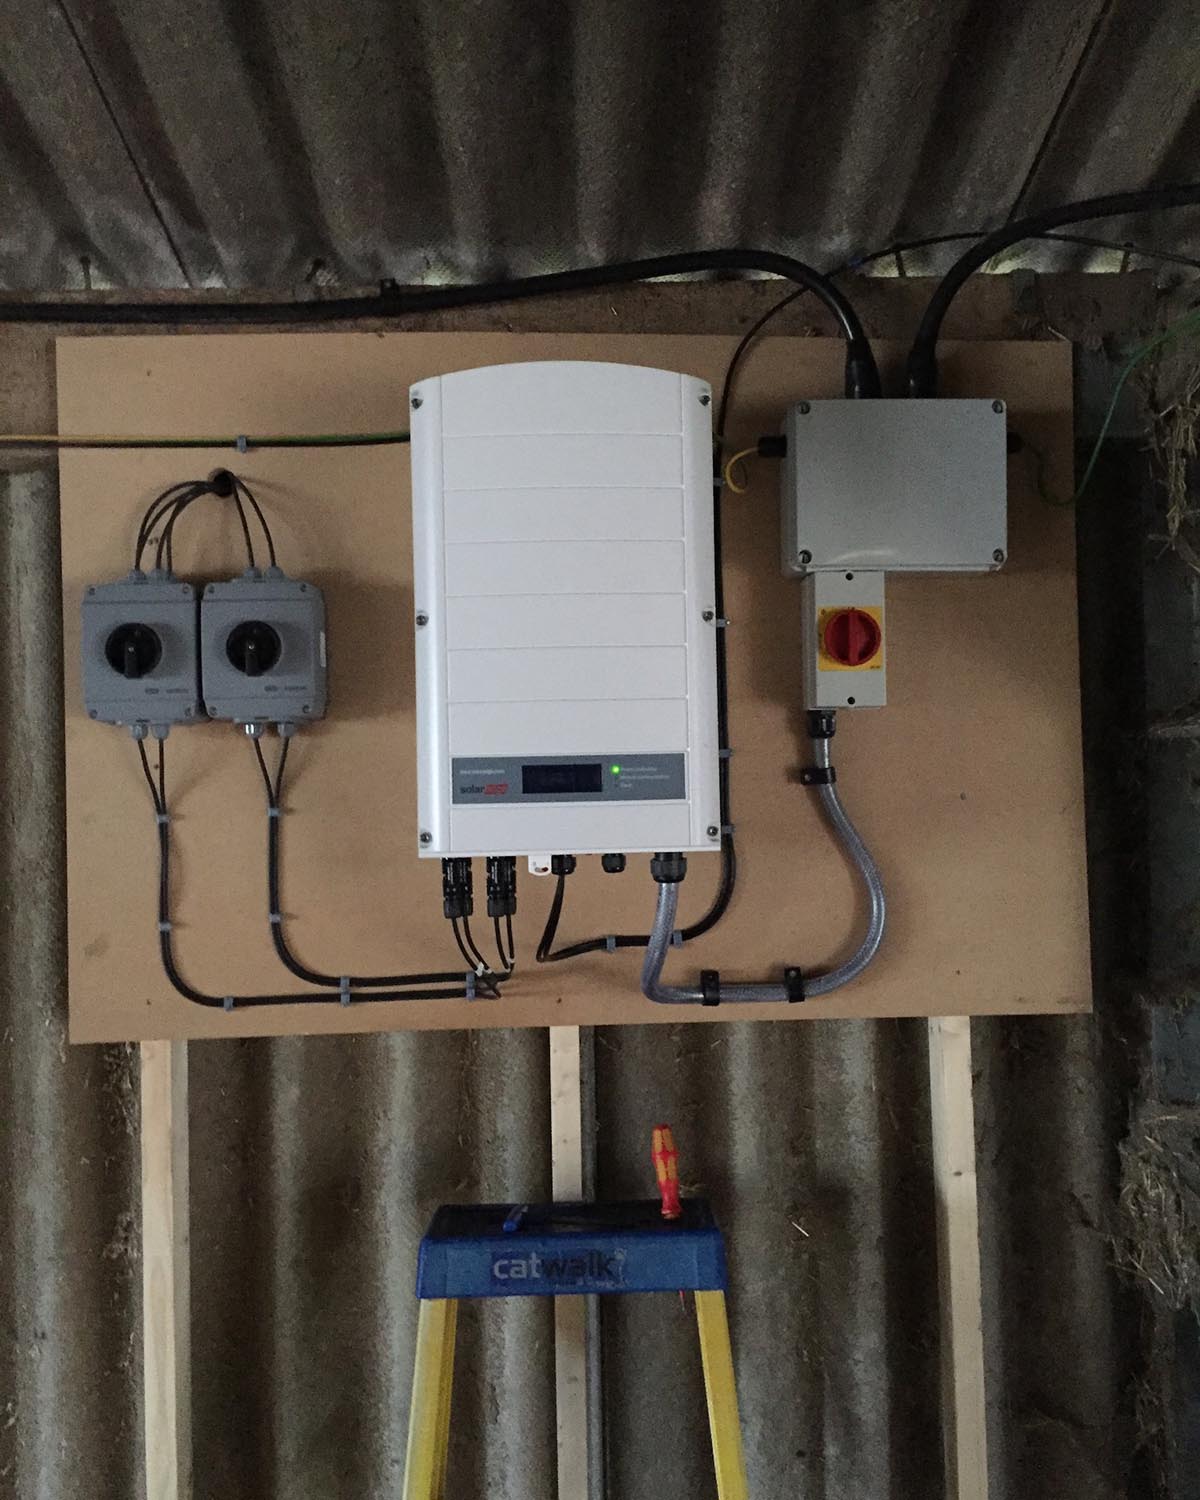 Boiler box connected to smaller boxes. NBG Digital Home. Electric Vehicle chargers, Solar and Heat Pumps, General Electrical Services in the South West.